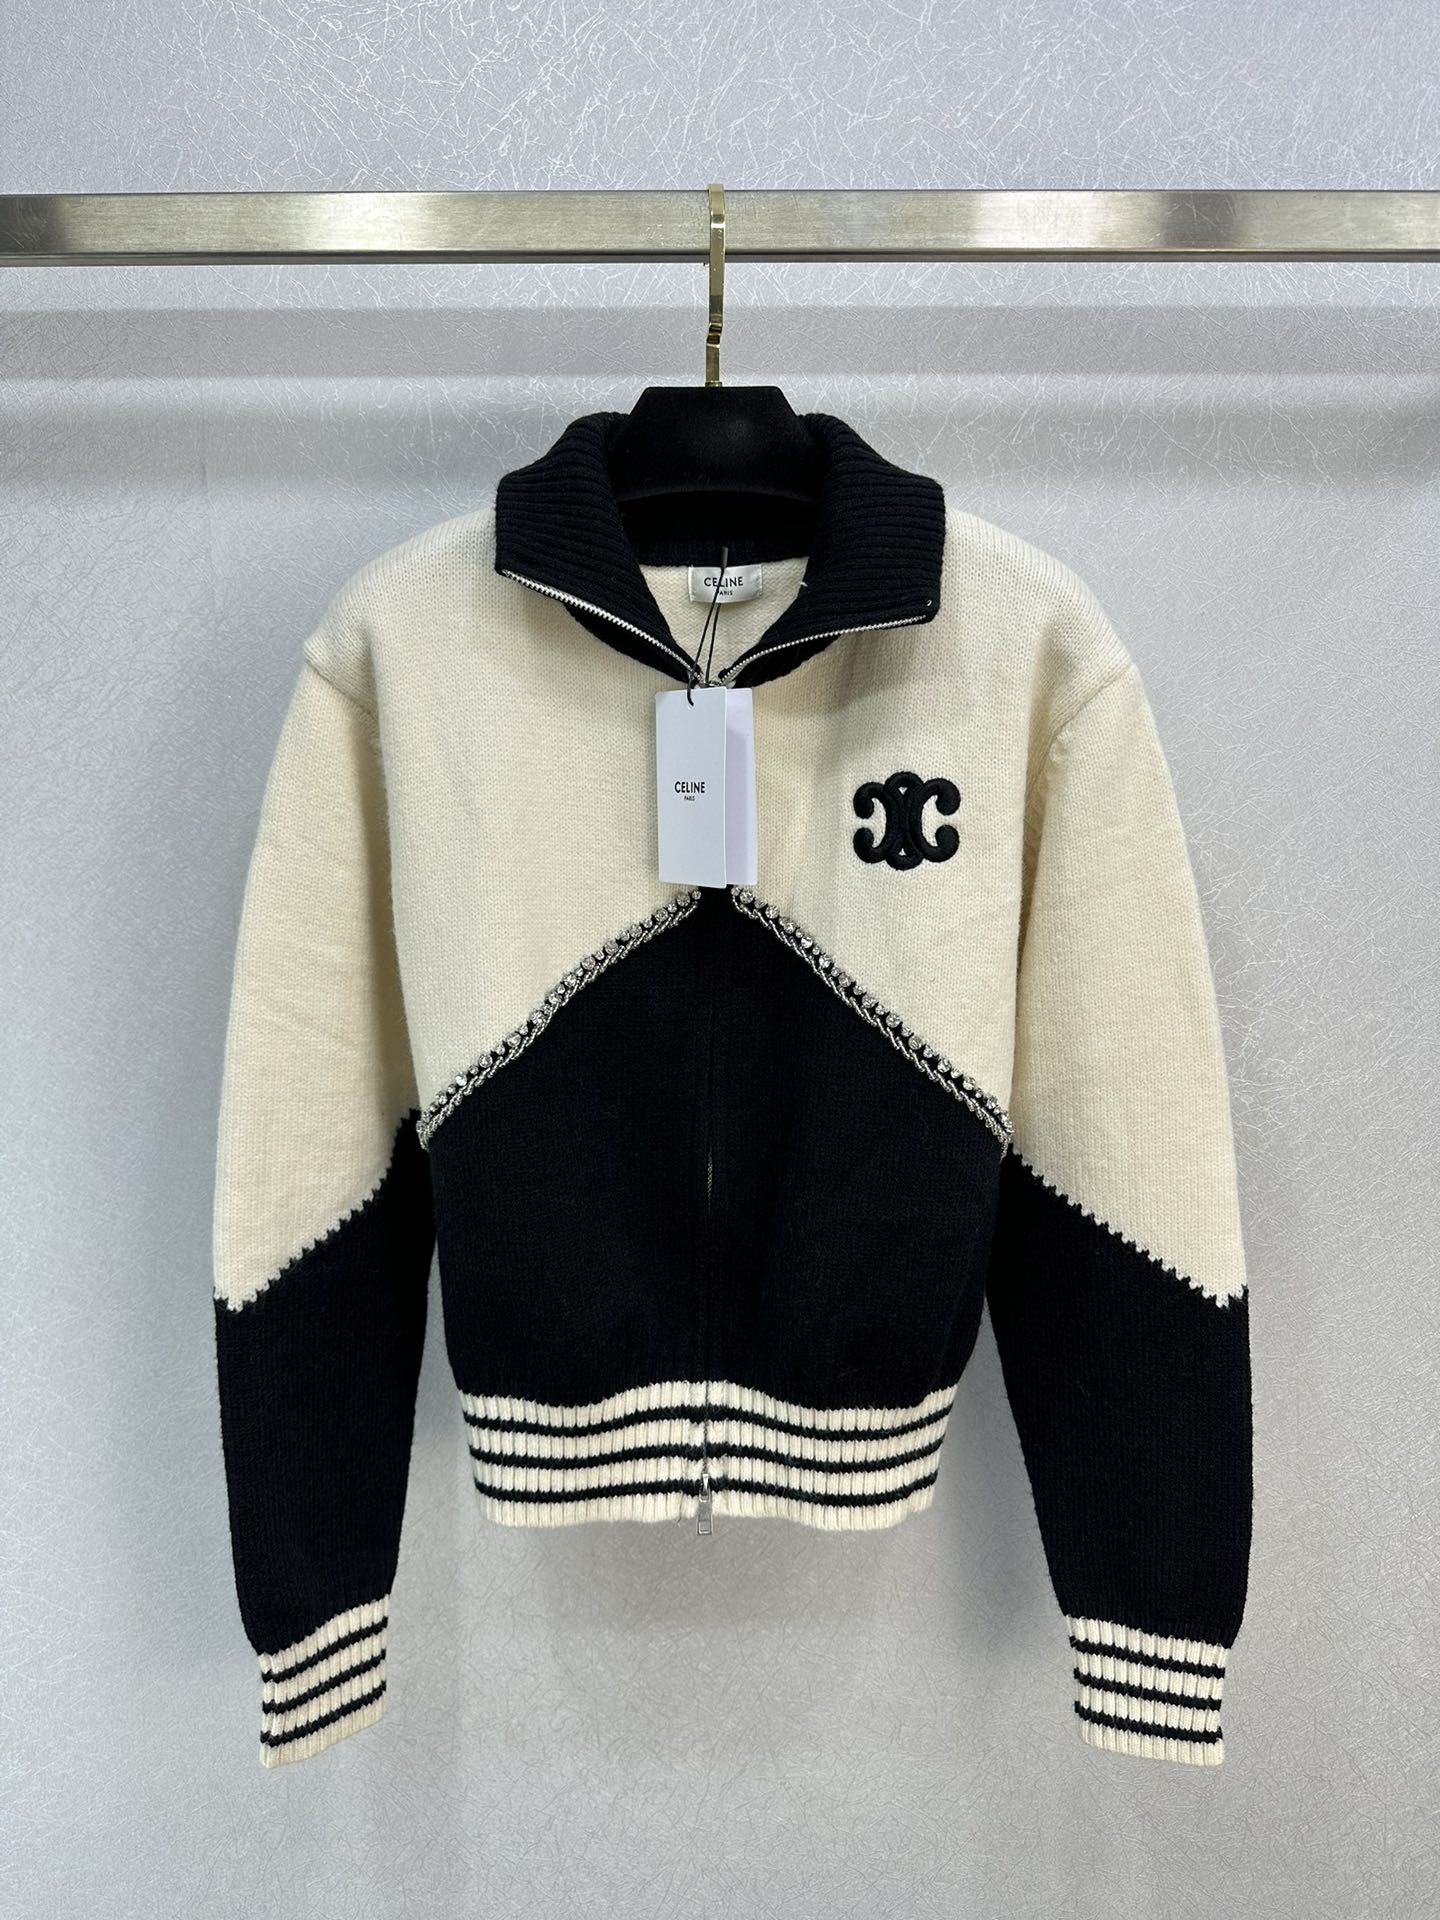 Celine Clothing Knit Sweater Sweatshirts Knitting Fall/Winter Collection